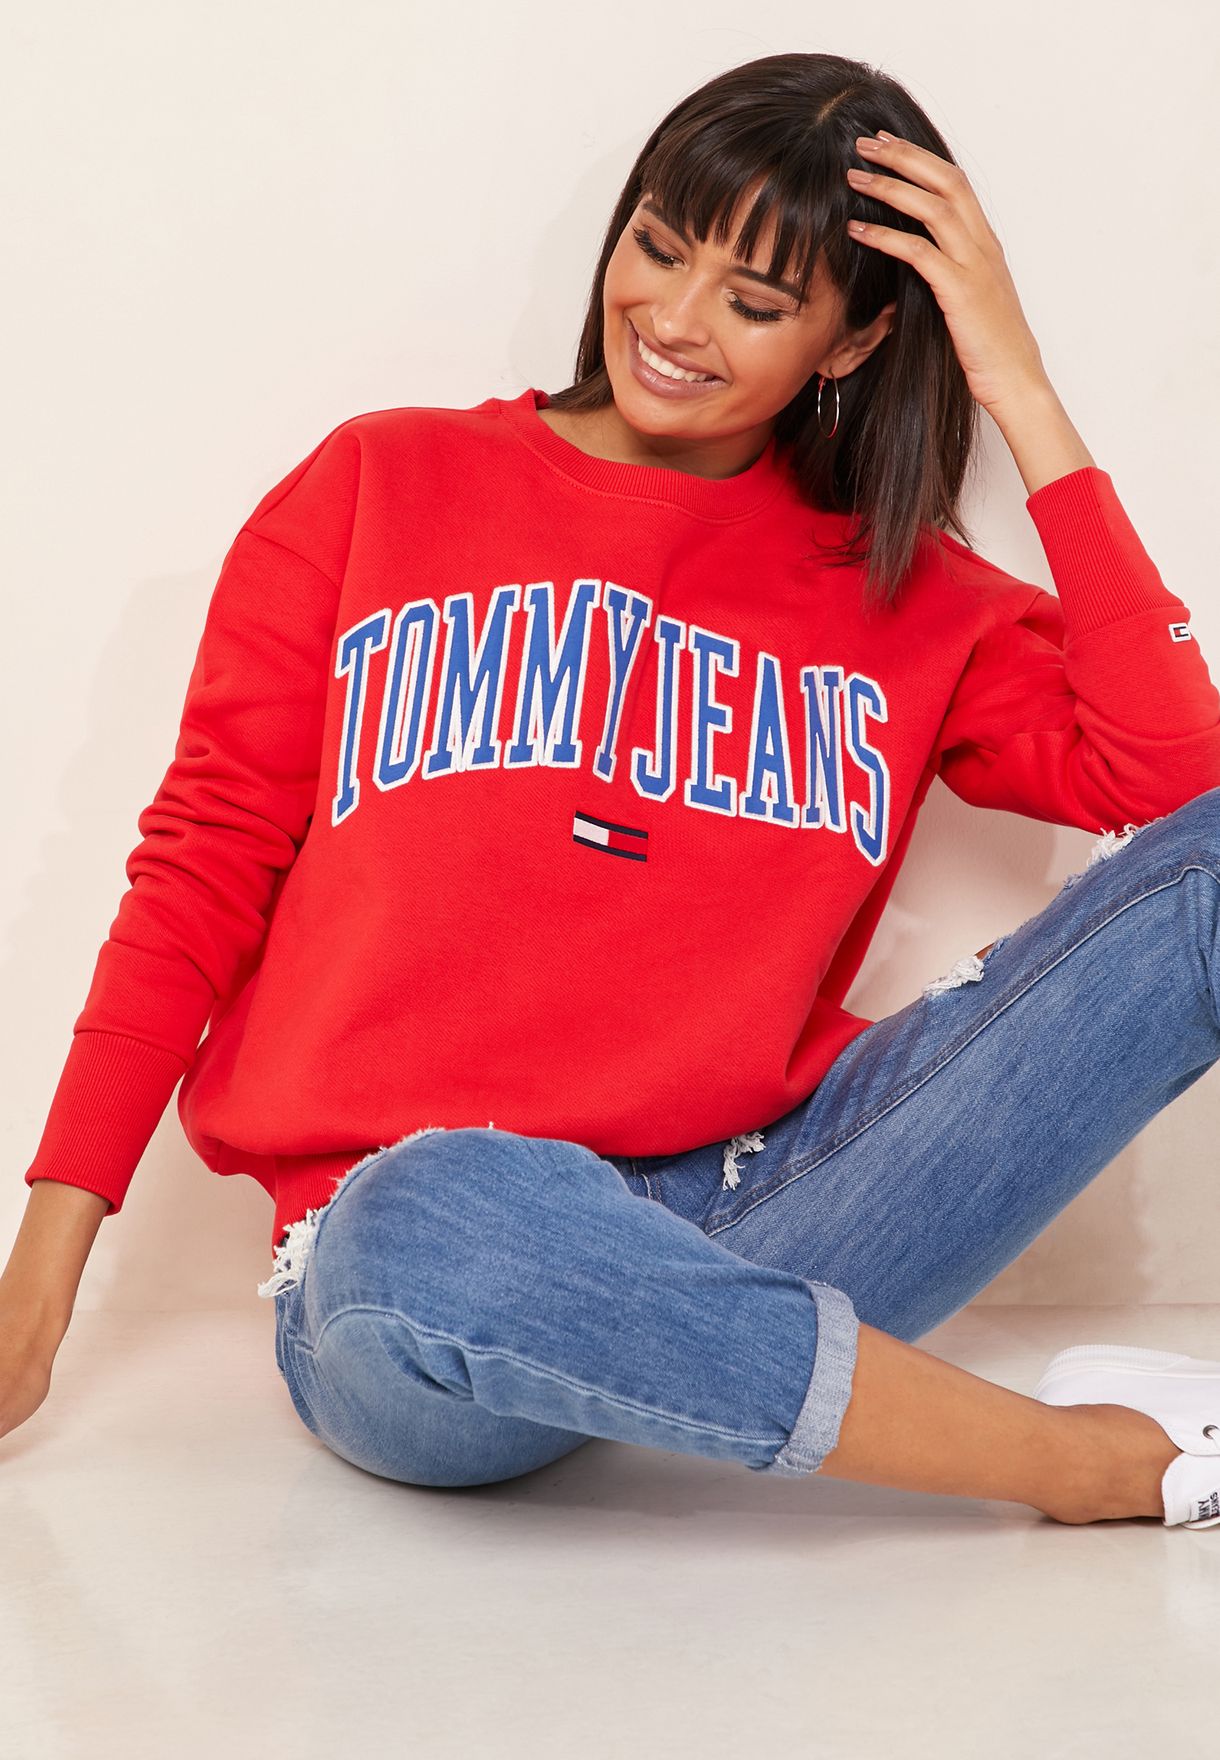 Buy Tommy Jeans Red Logo Sweatshirt for 